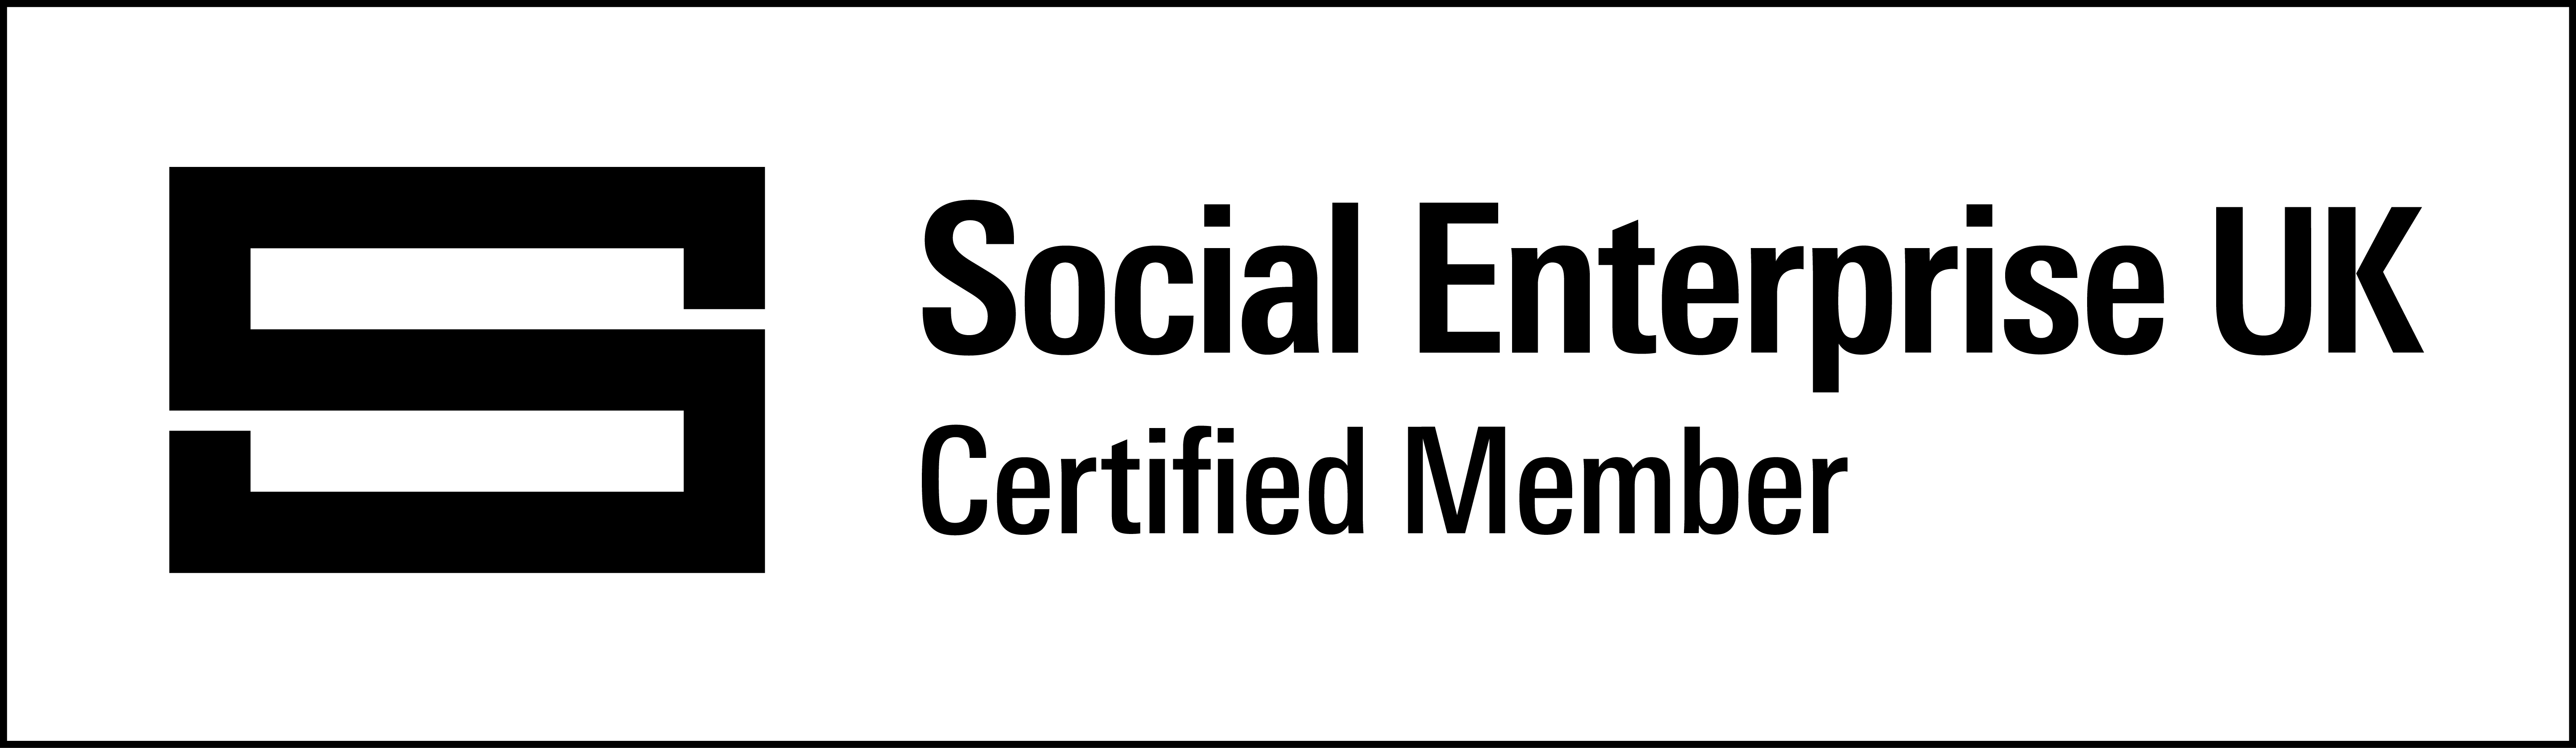 Right of Reply Certified Social Enterprise